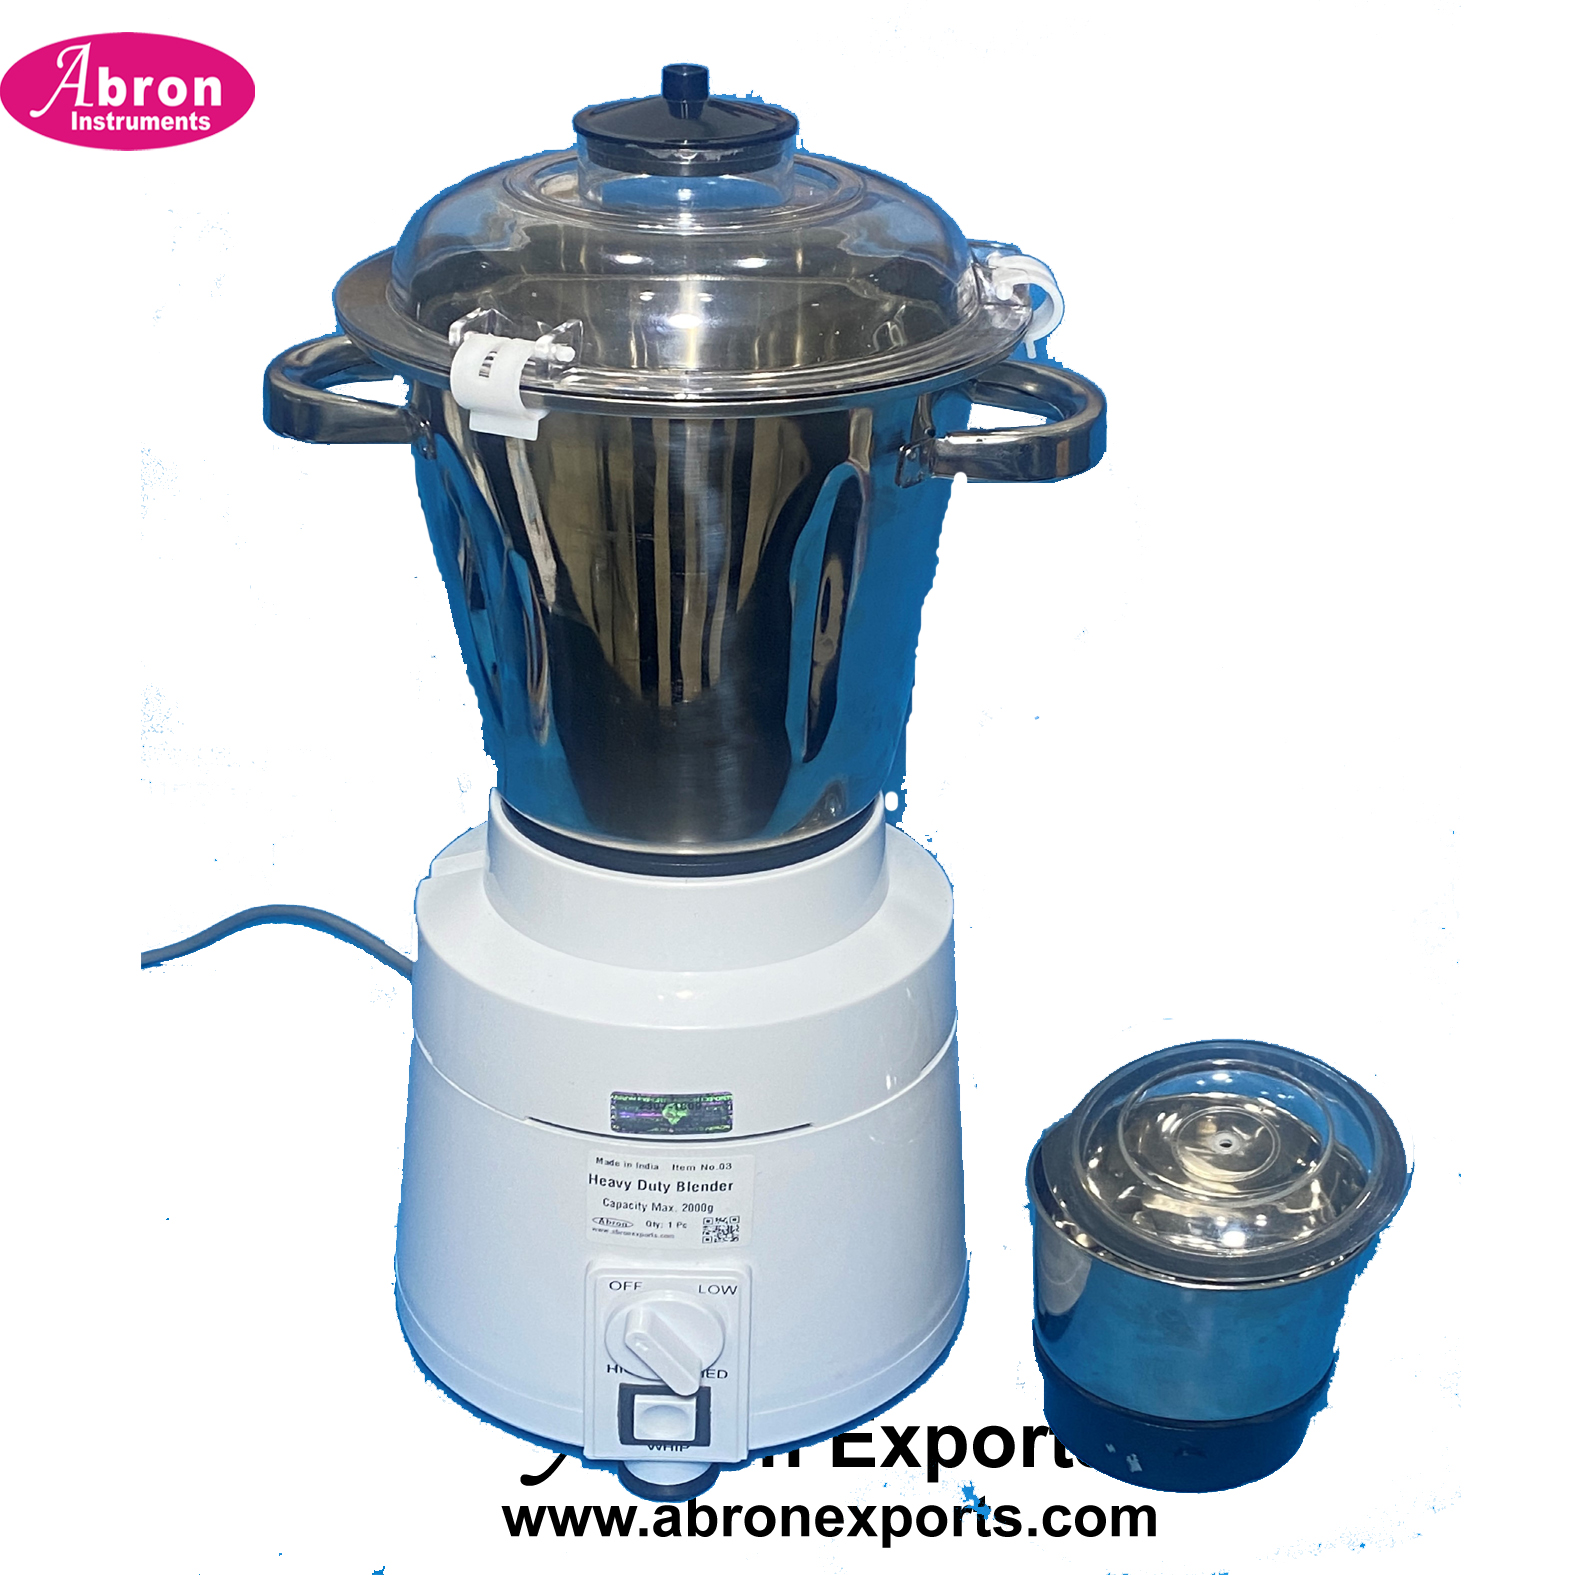 Mixer Grinder Blender Dry Wet 2 liter dry 5 lit wet 2200w with 2 SS Jars Mixey heavy duty Abron AC-277W2S2